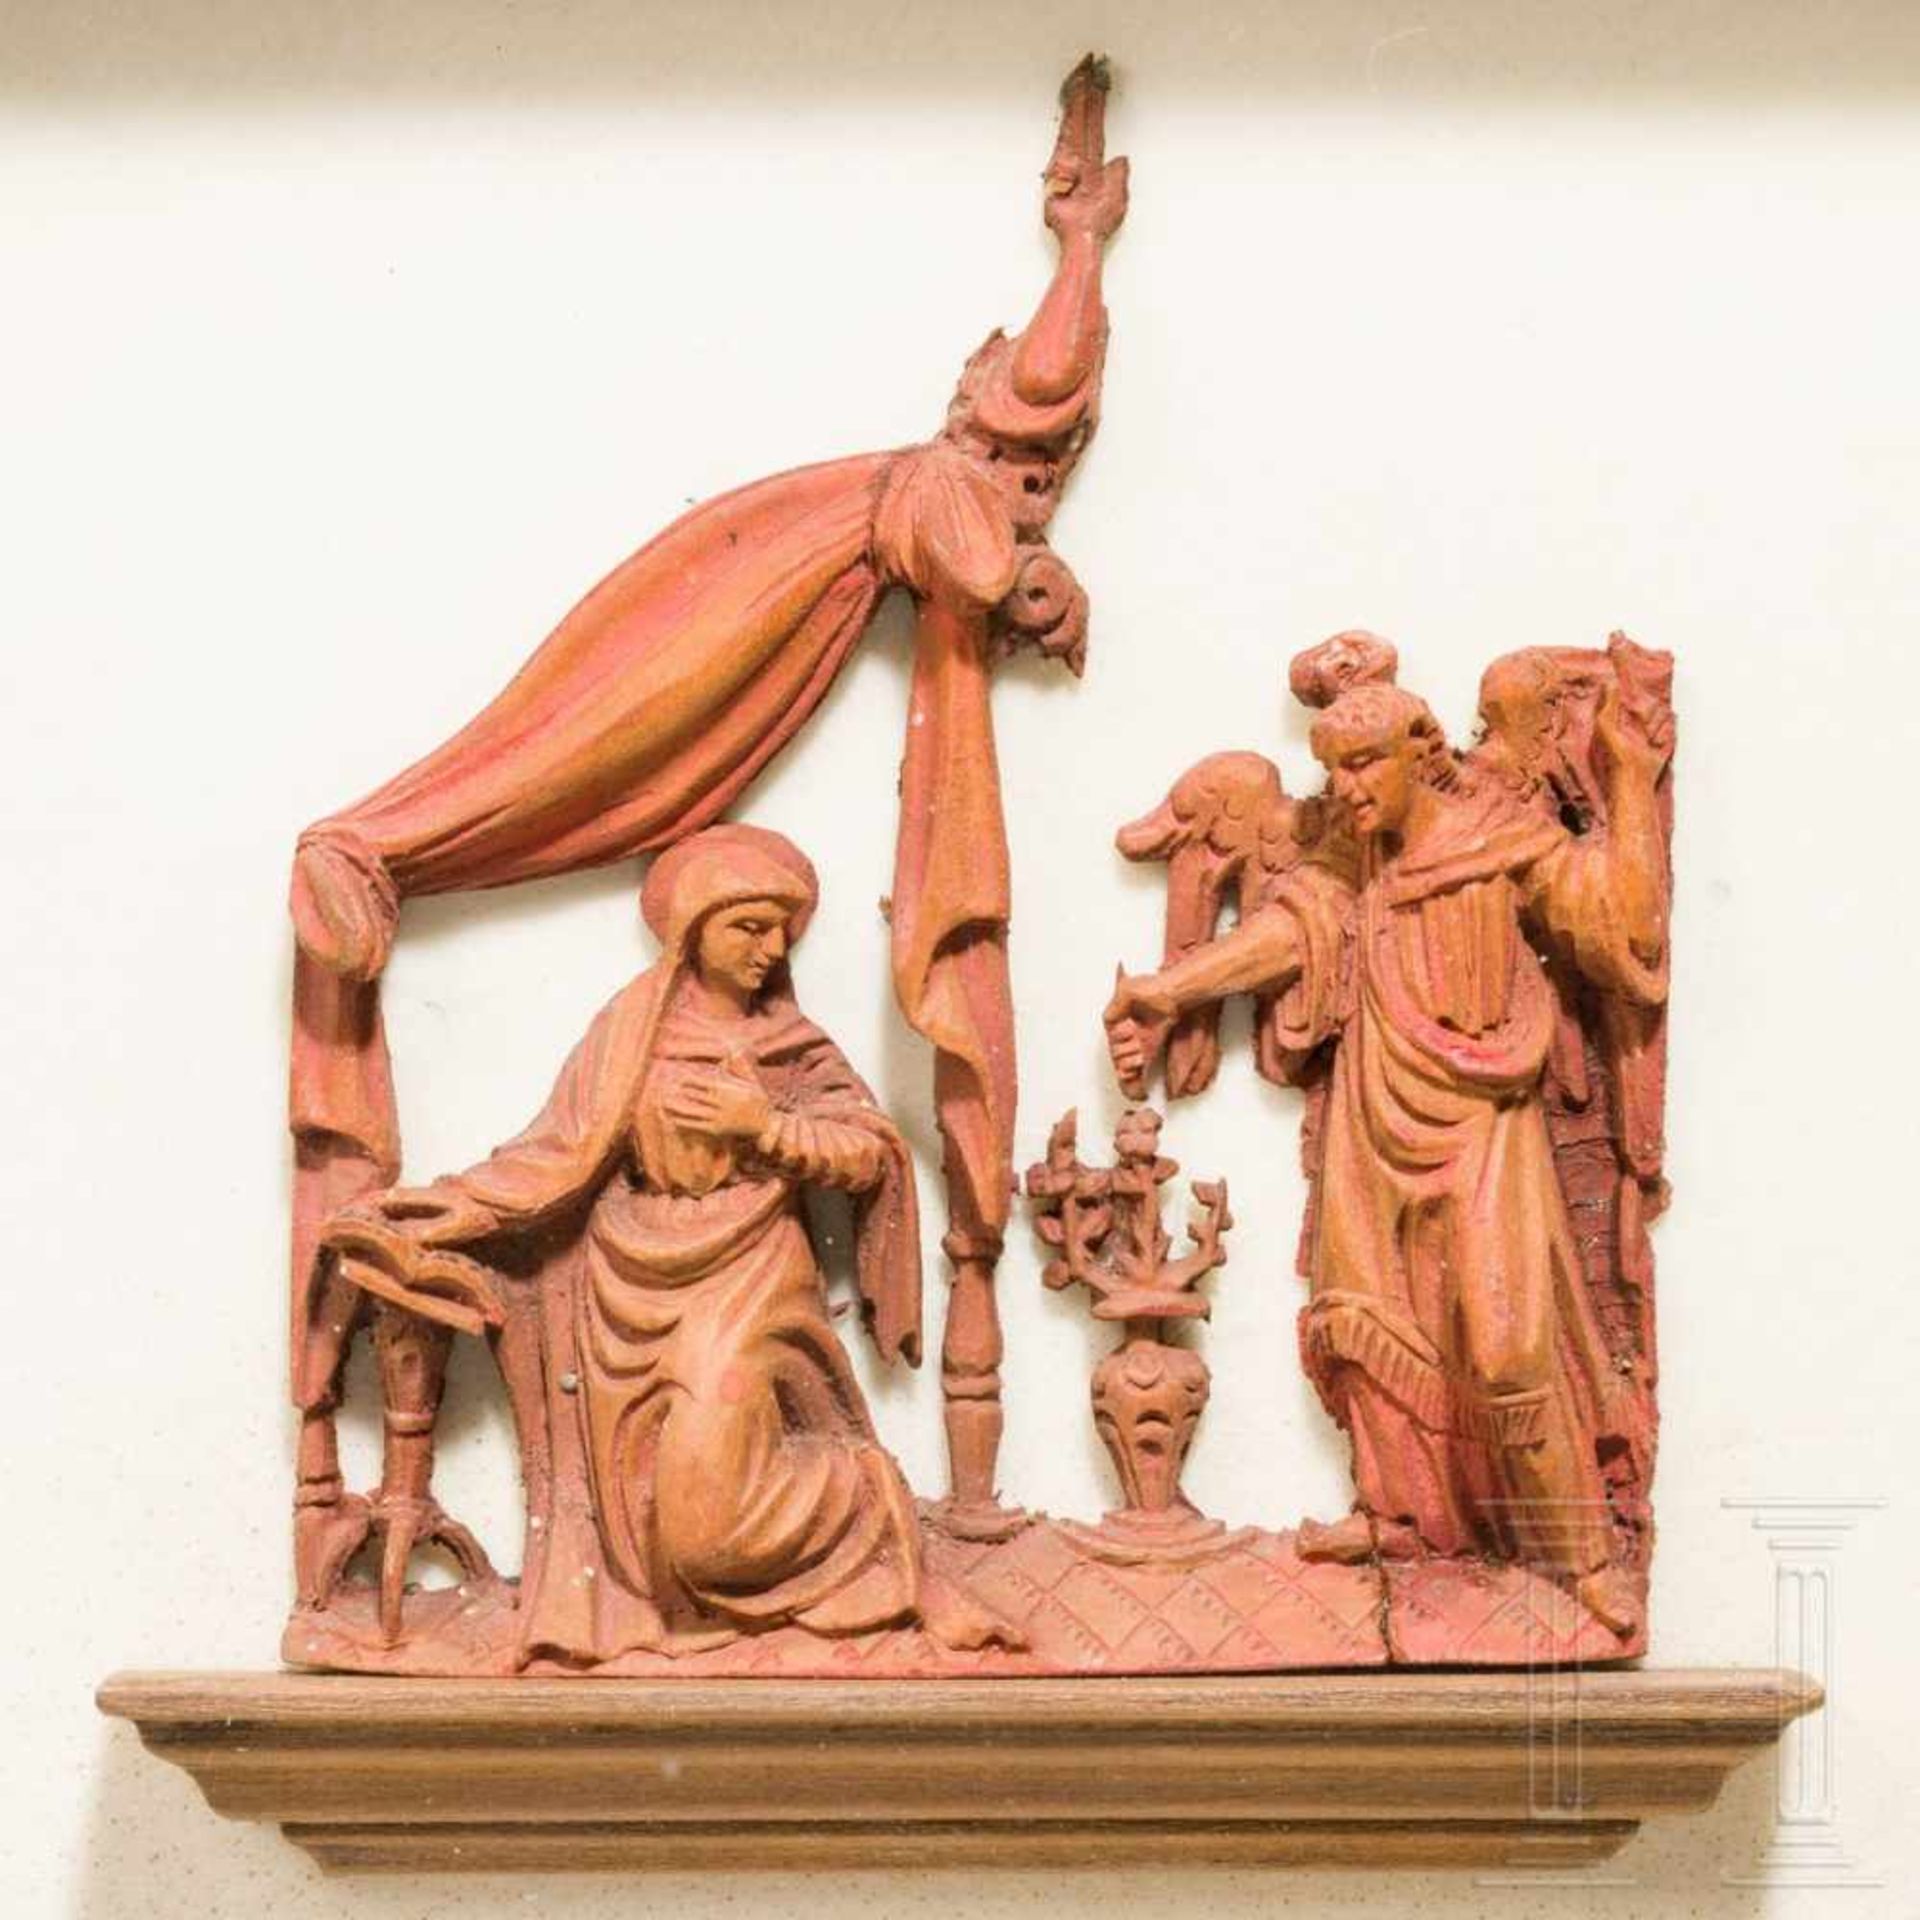 Three Flemish or French microcarvings showing scenes from the life of Virgin Mary, circa - Bild 3 aus 5